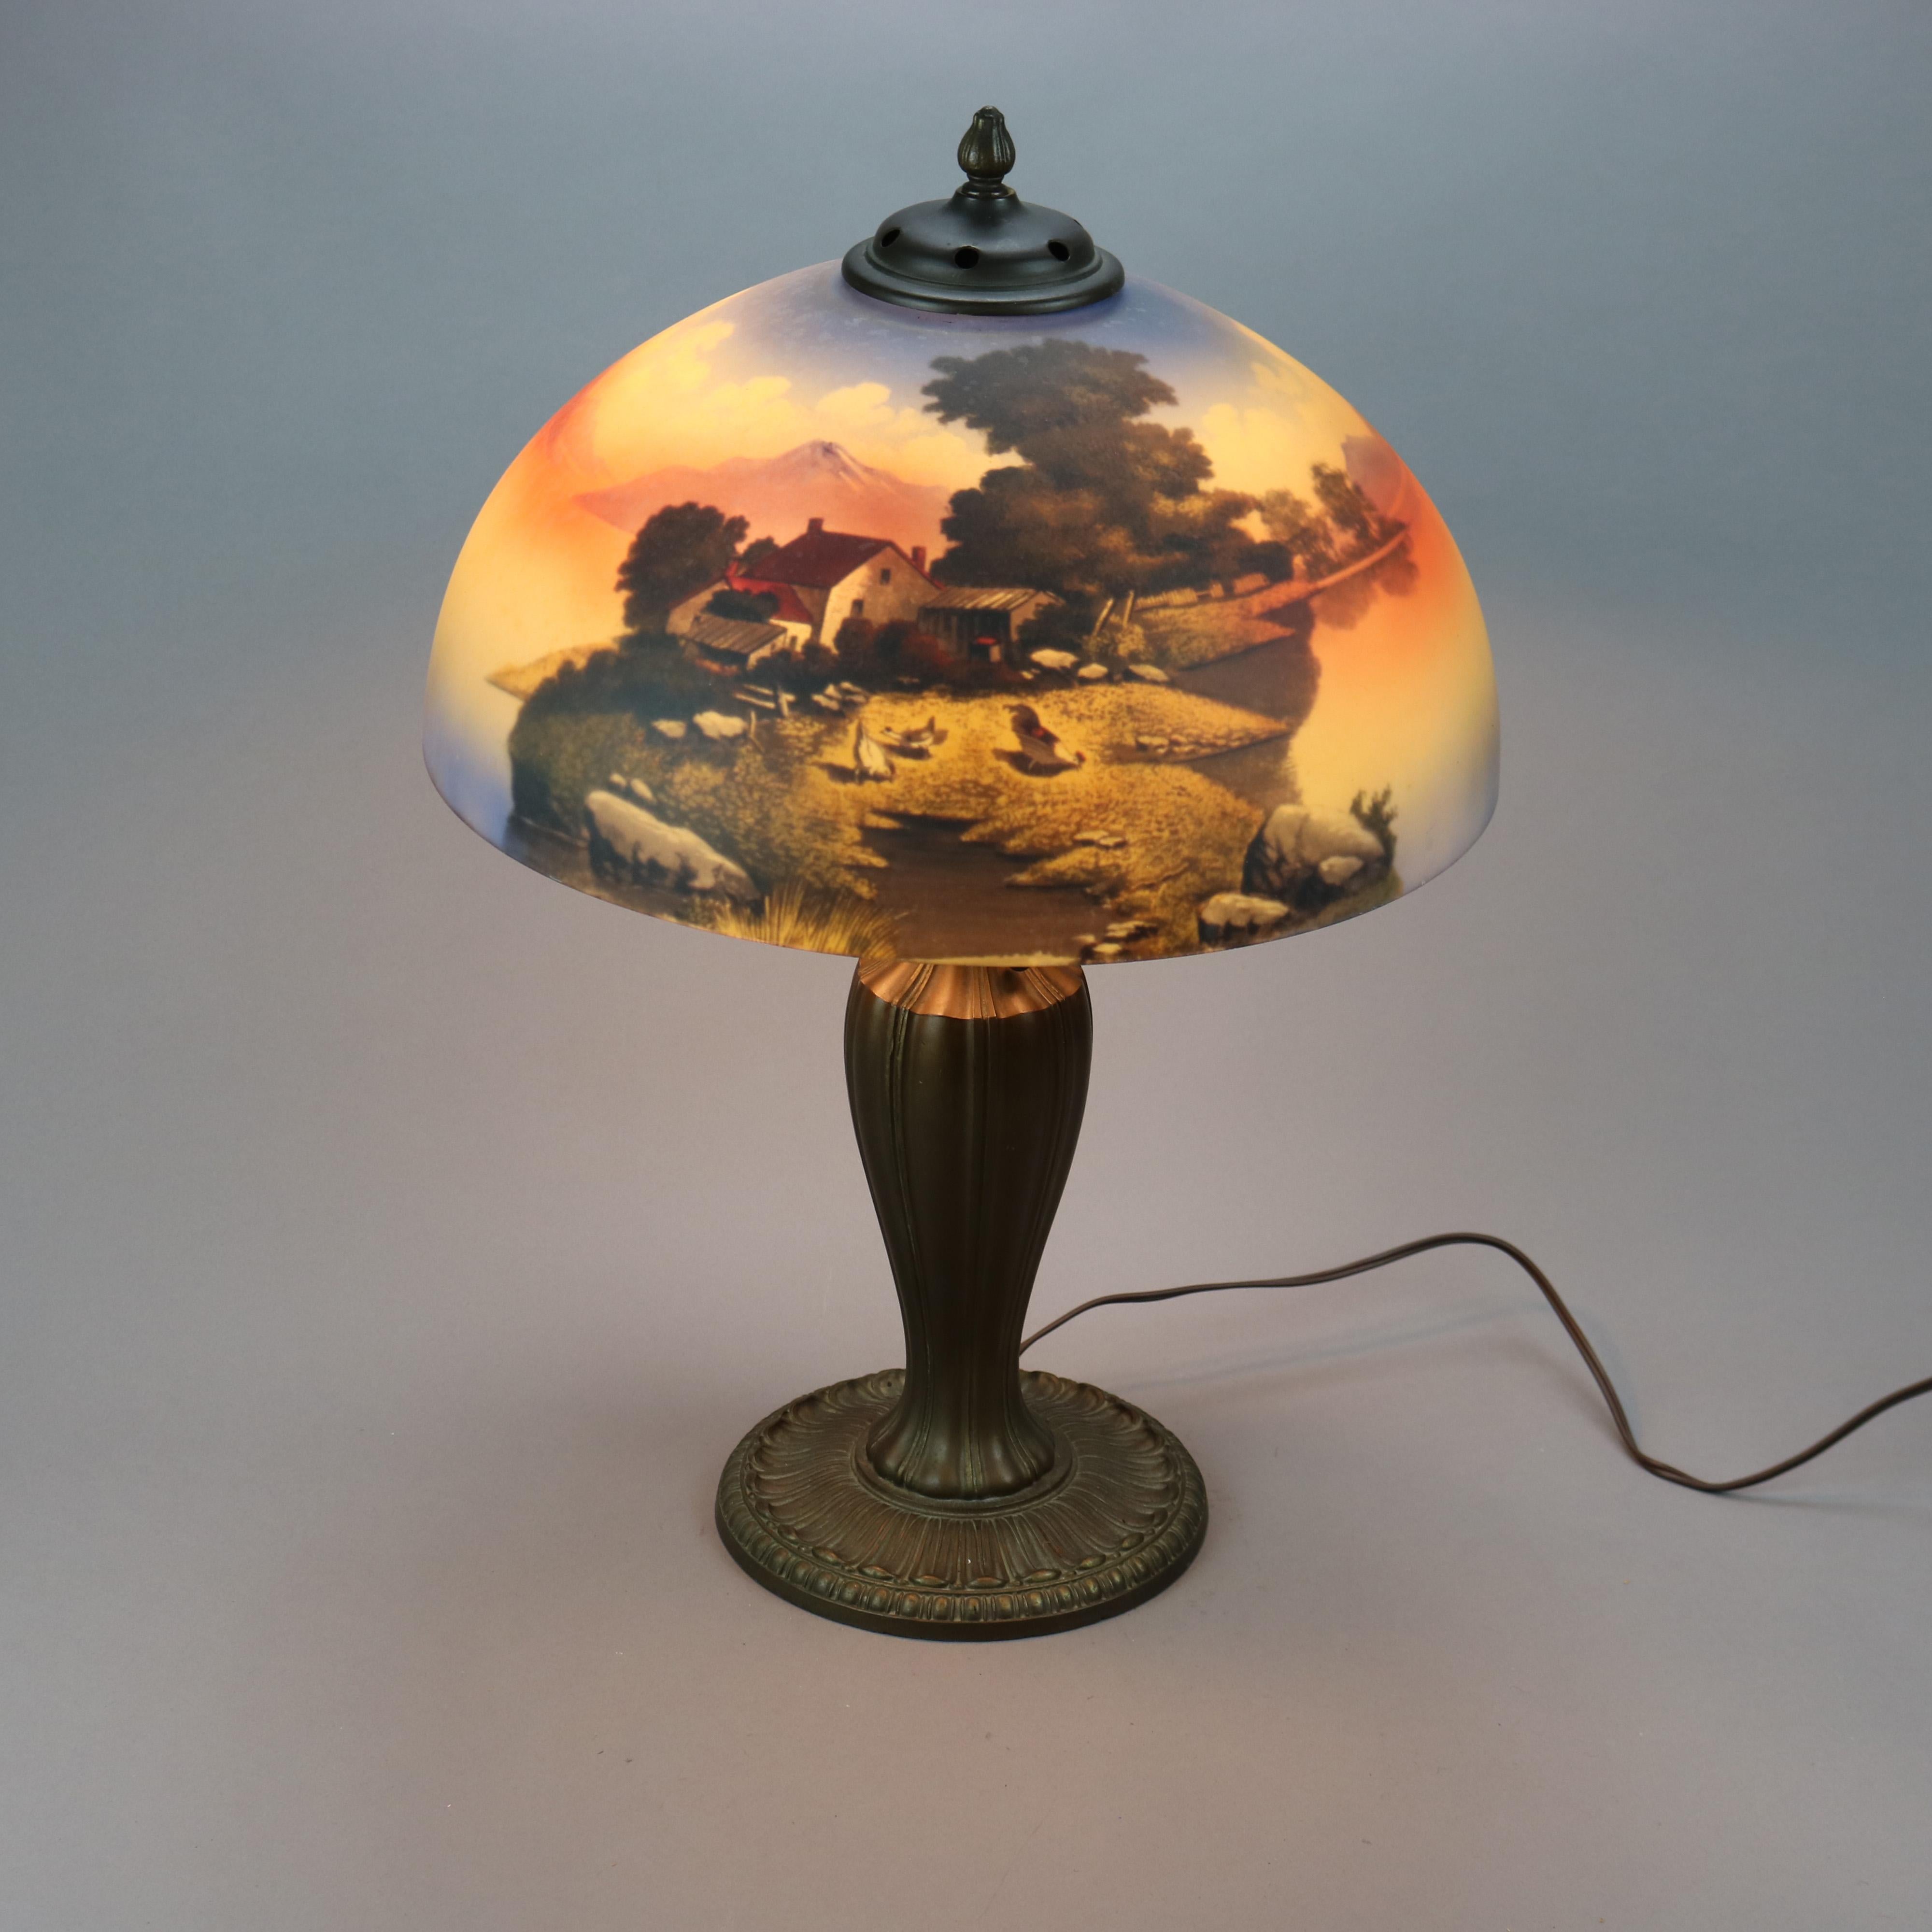 Arts and Crafts Antique Arts & Crafts Phoenix Reverse Painted Lamp with Farm & Chickens, c1920